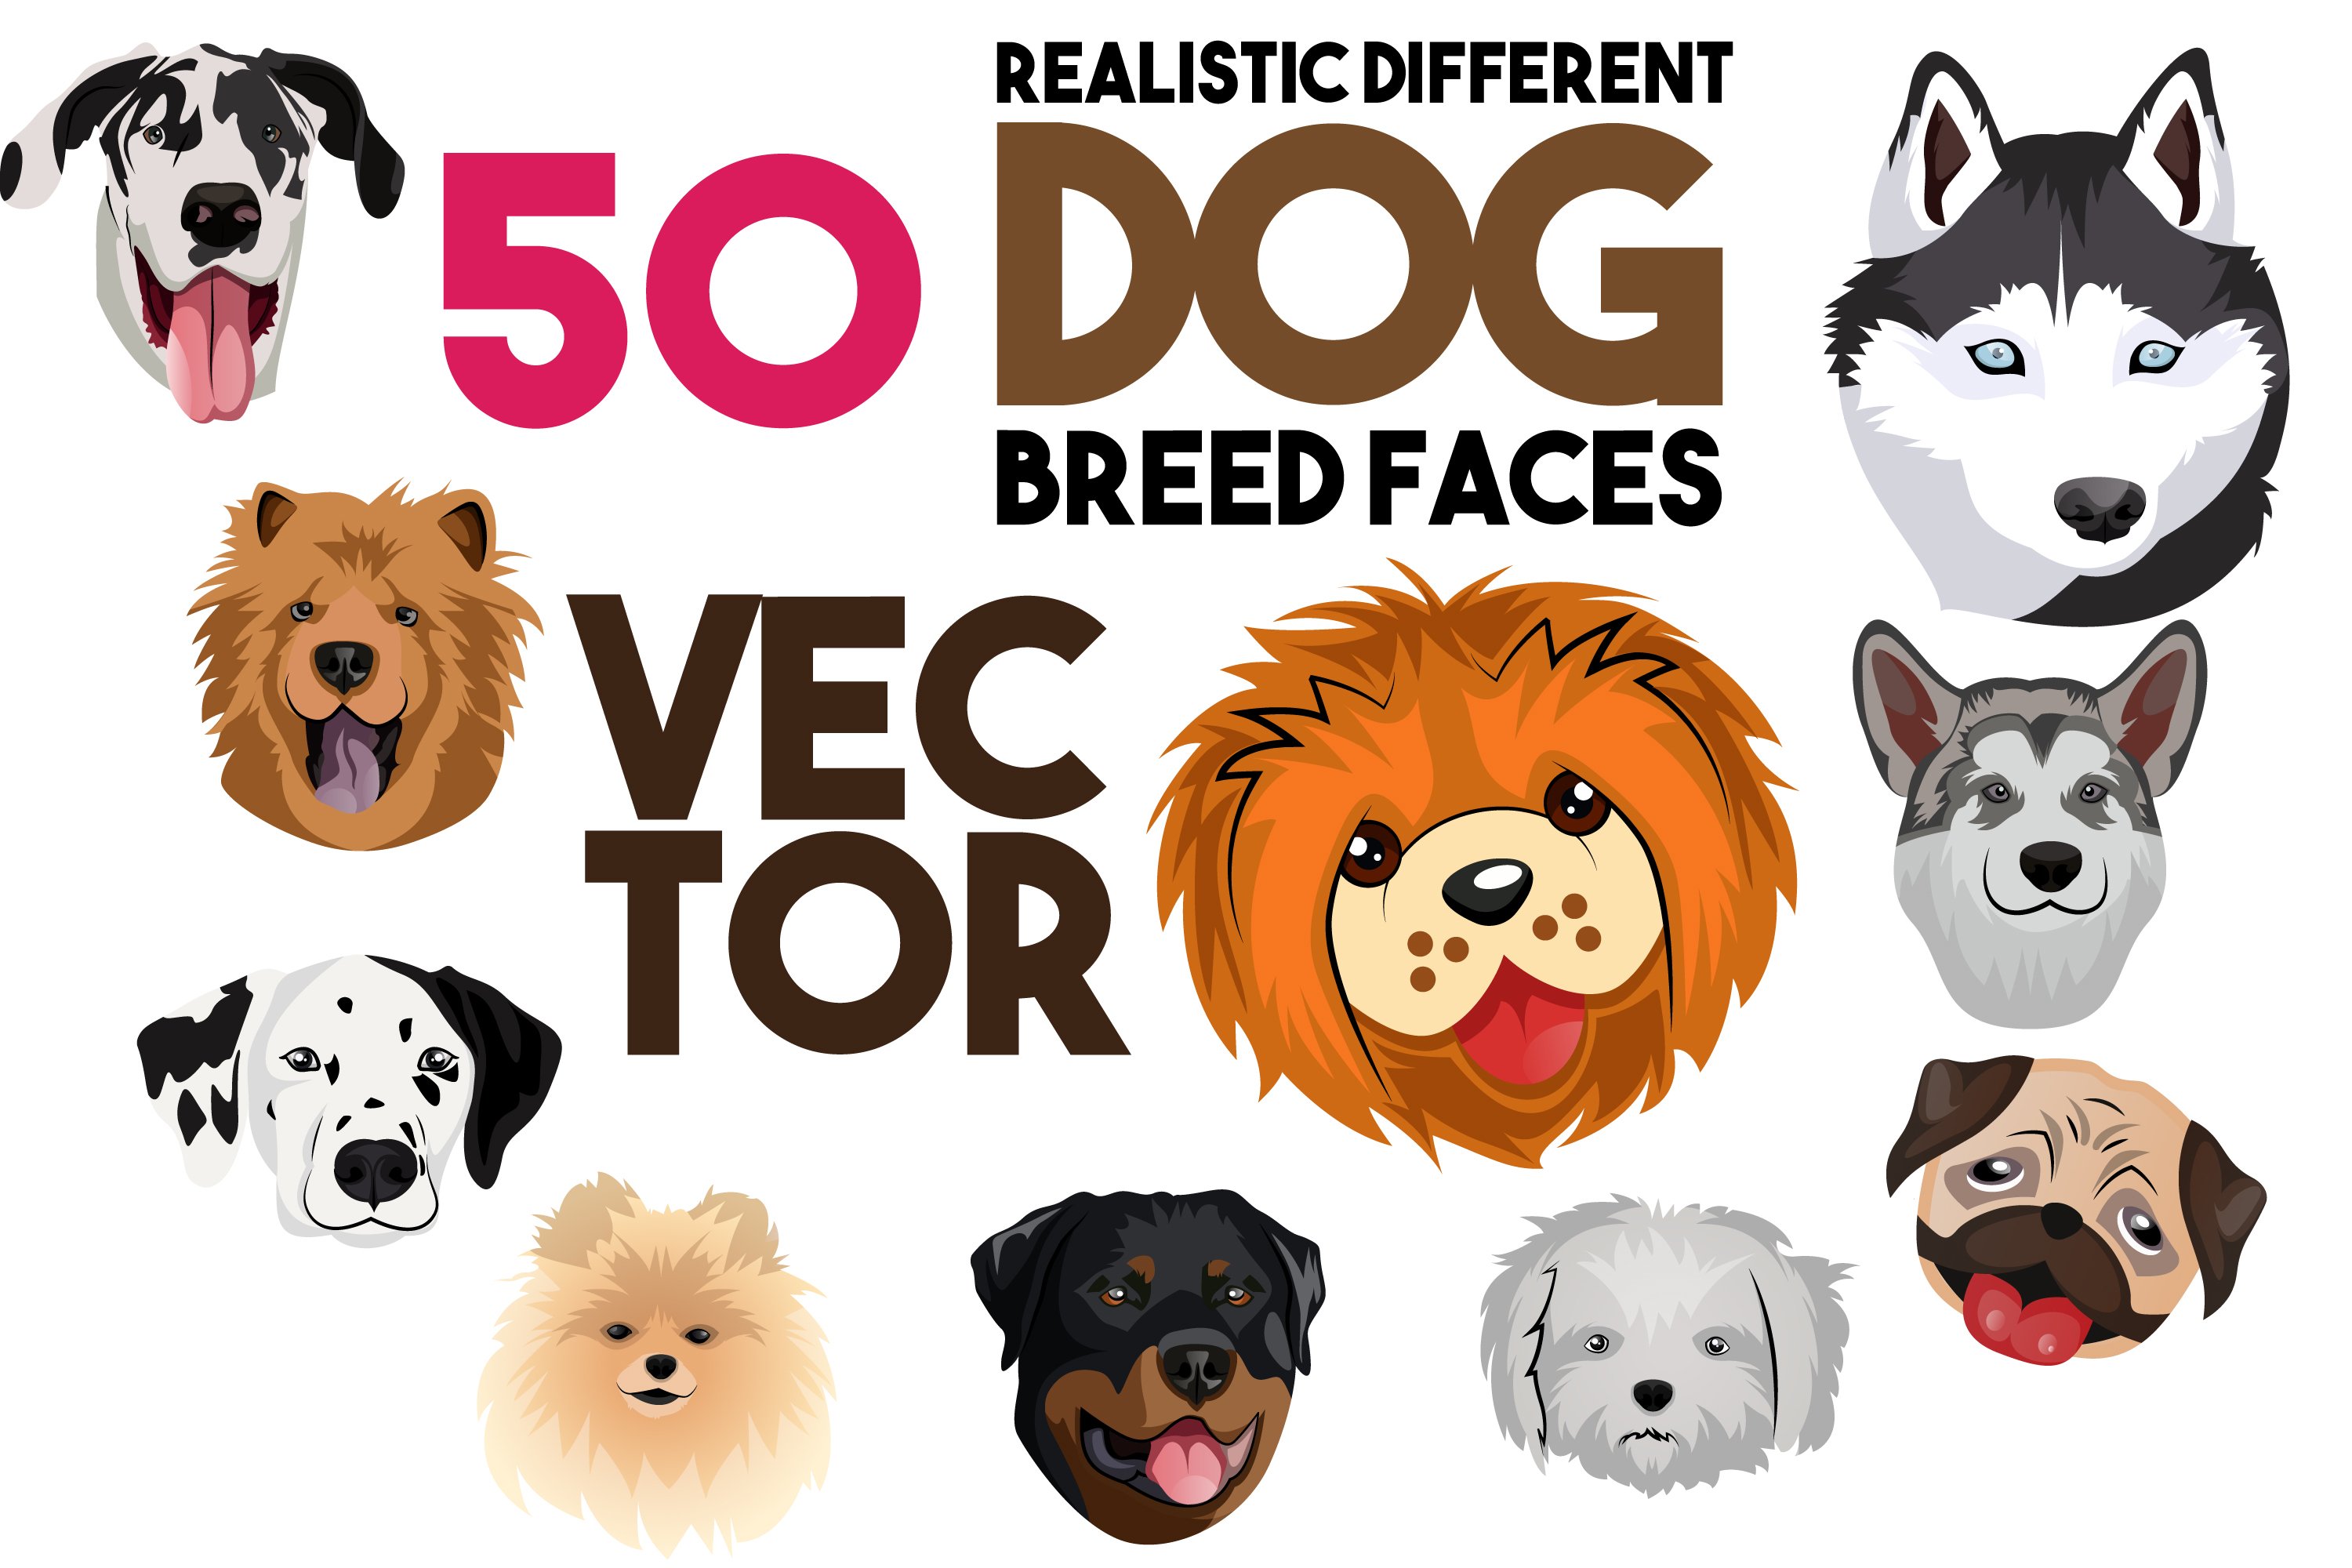 Cute dog face for your illustrations.